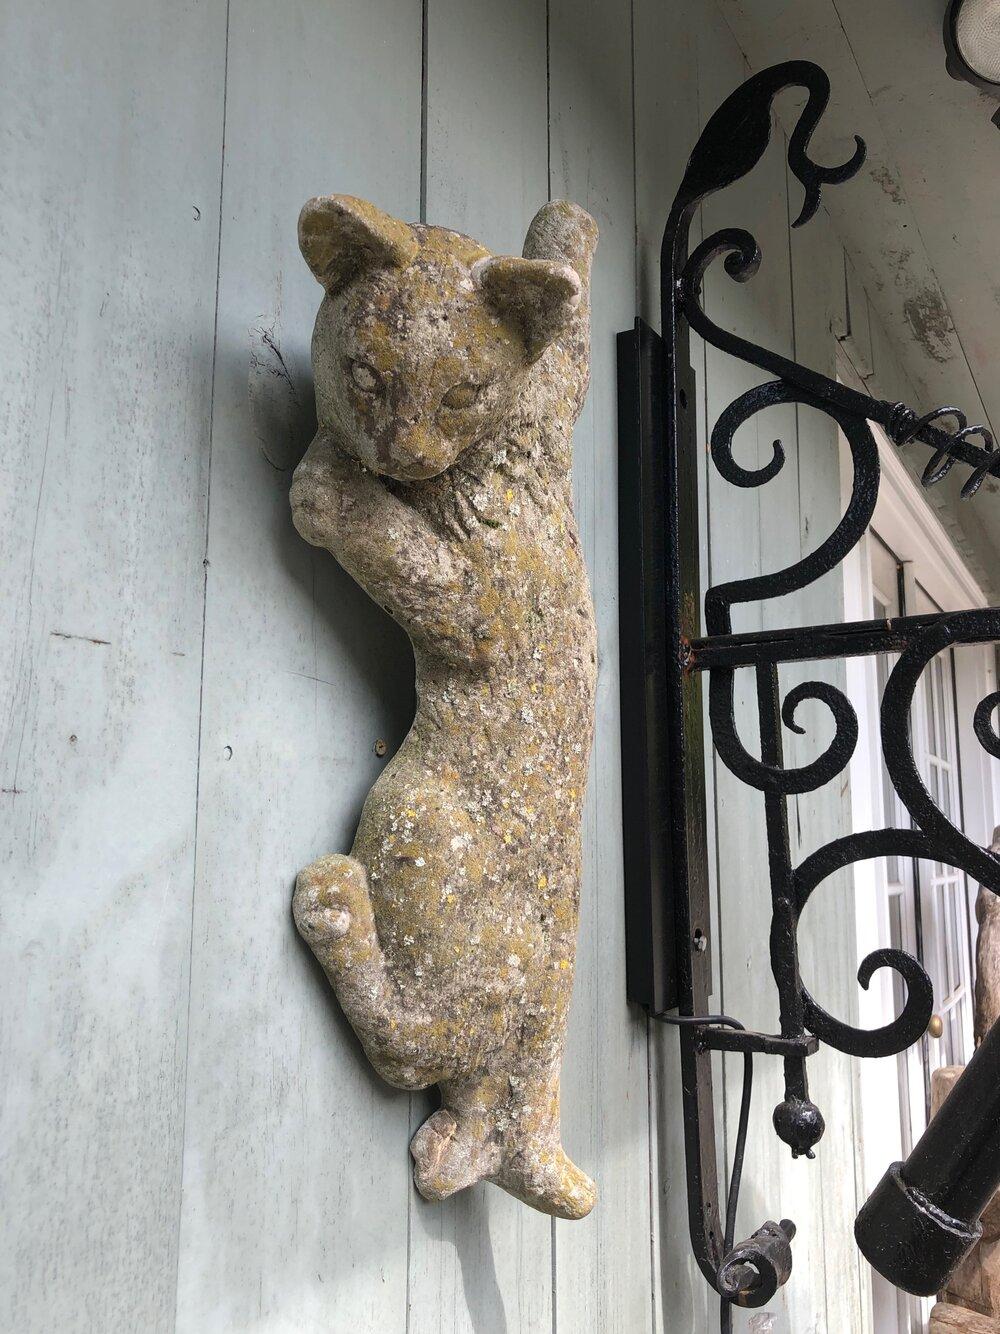 We love this whimsical portrayal of a climbing cat and its surface is patina-perfection! In wonderful condition, the plaque has a sturdy recessed metal hanger on the reverse side to make installation a snap. Place it alongside your door or barn or